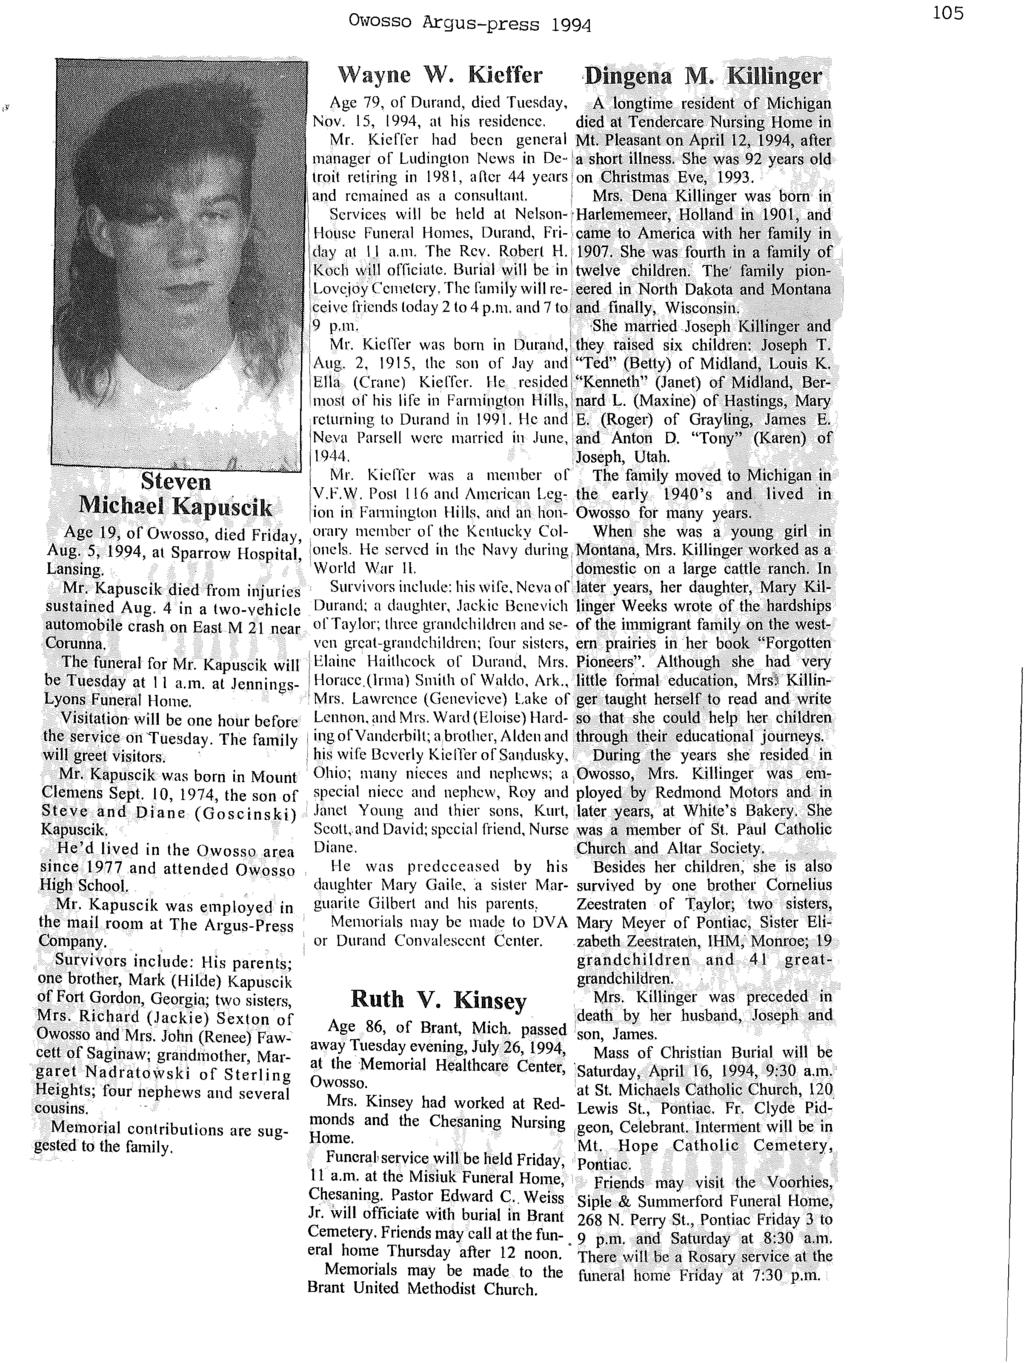 Owosso Argus-press 1994 105 Wayne W. Kieffer,Dingena M. Killinger Age 79, of Durand, died Tuesday, A longtime ~esident of Michigan Nov. 15, 1994, at his residence.